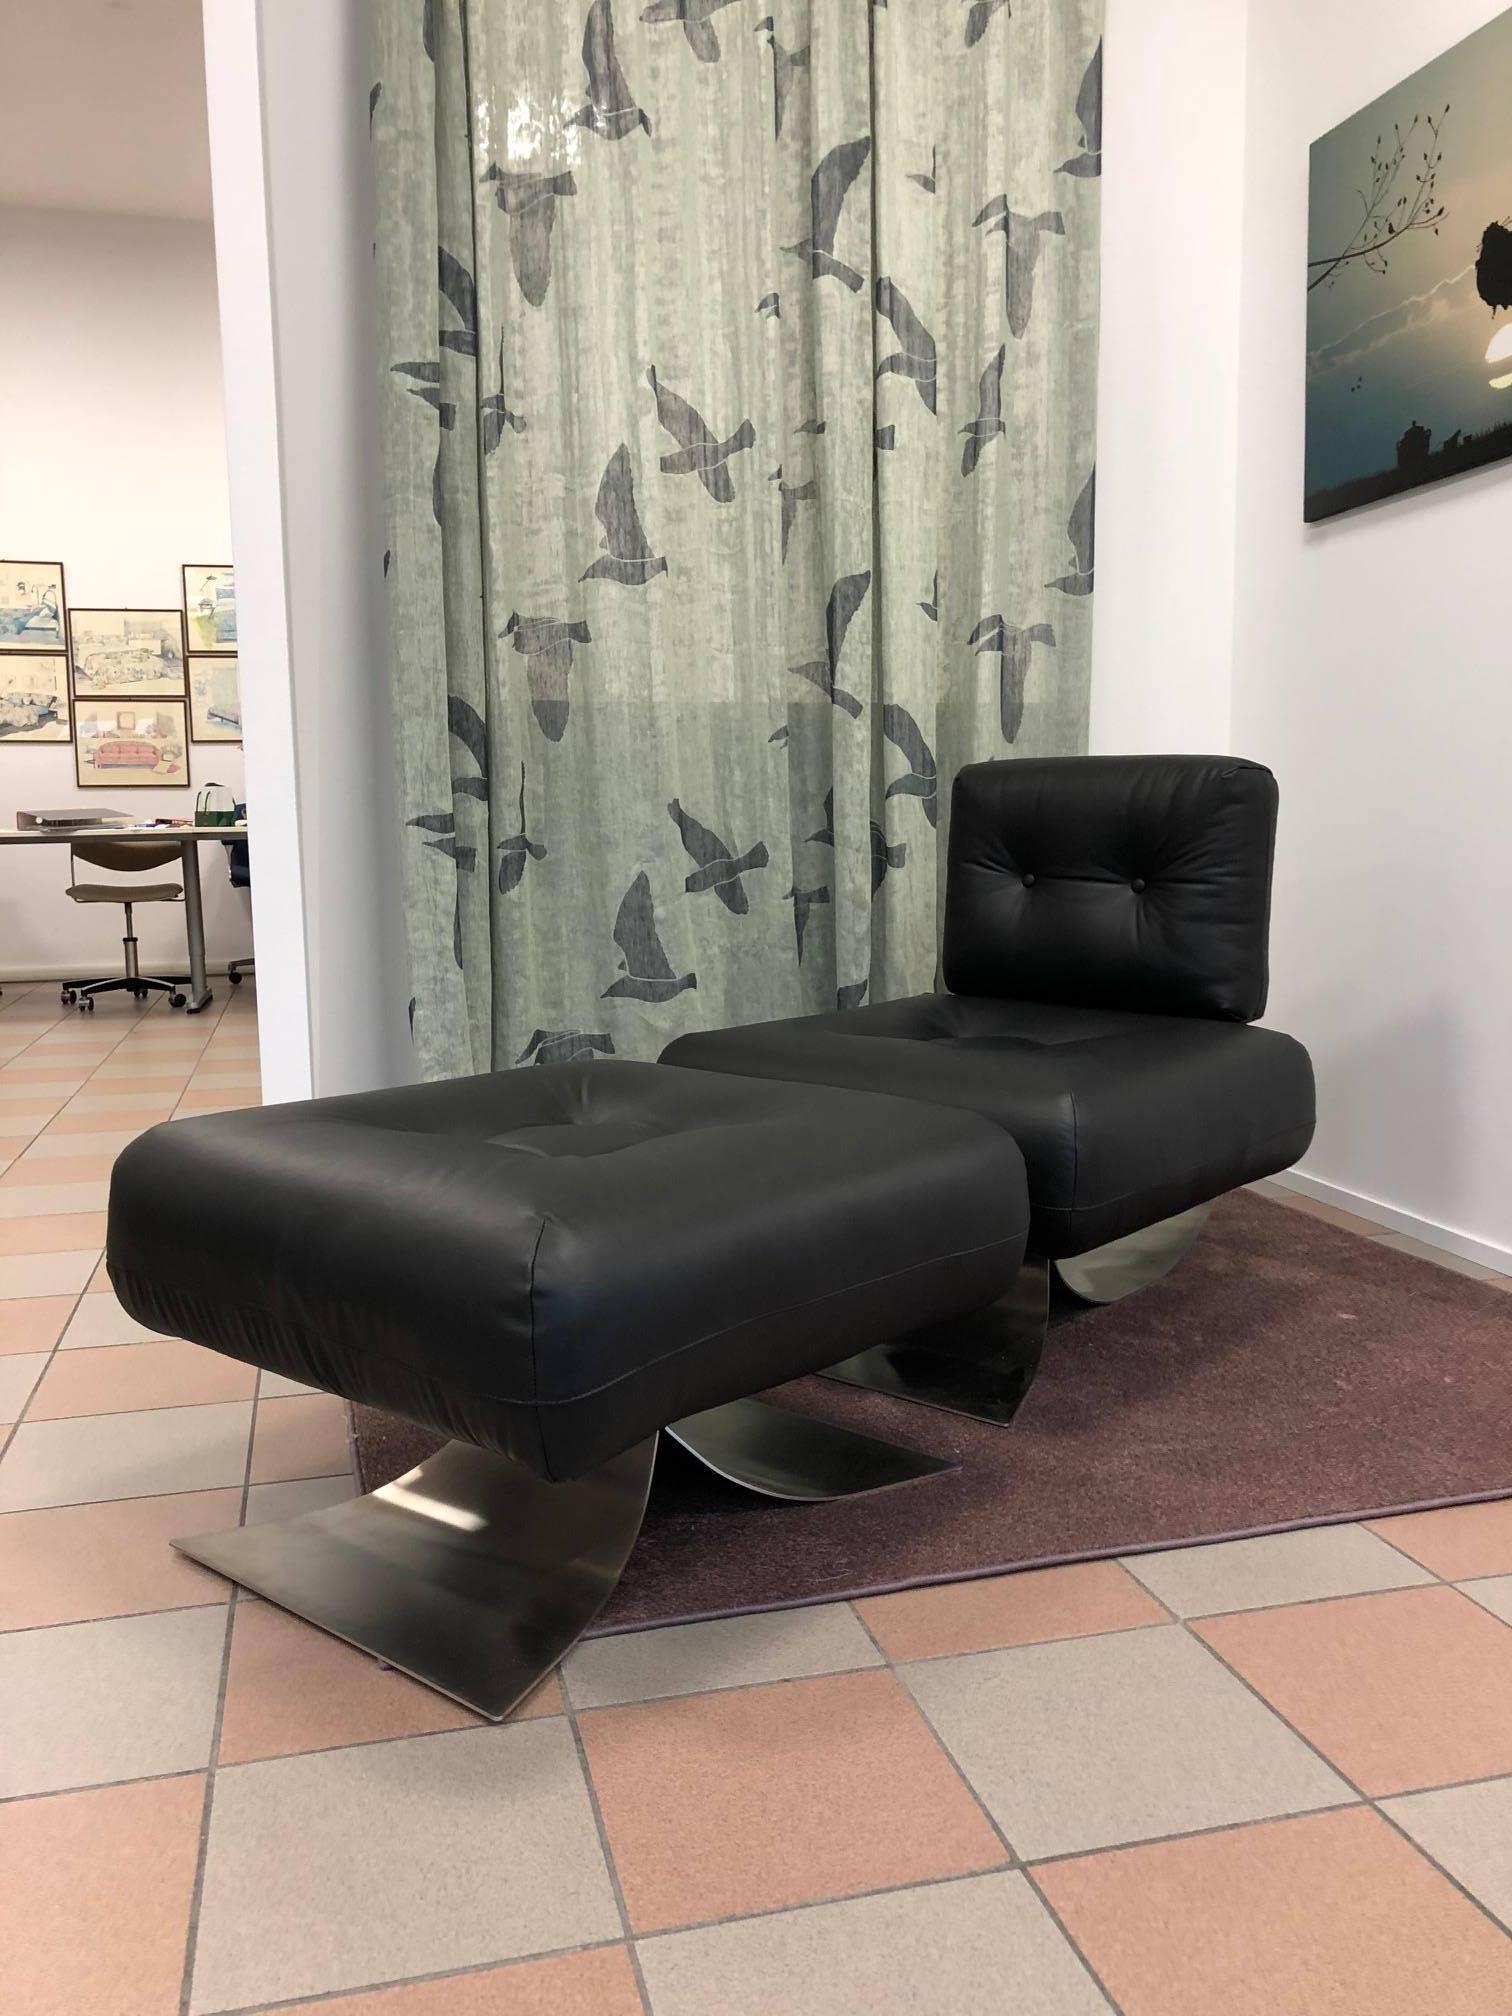 Iconic Alta chair and ottoman designed by Oscar Niemeyer for Mobilier International in the 1970s. Steel structure, bakelite knobs, black leather coating.